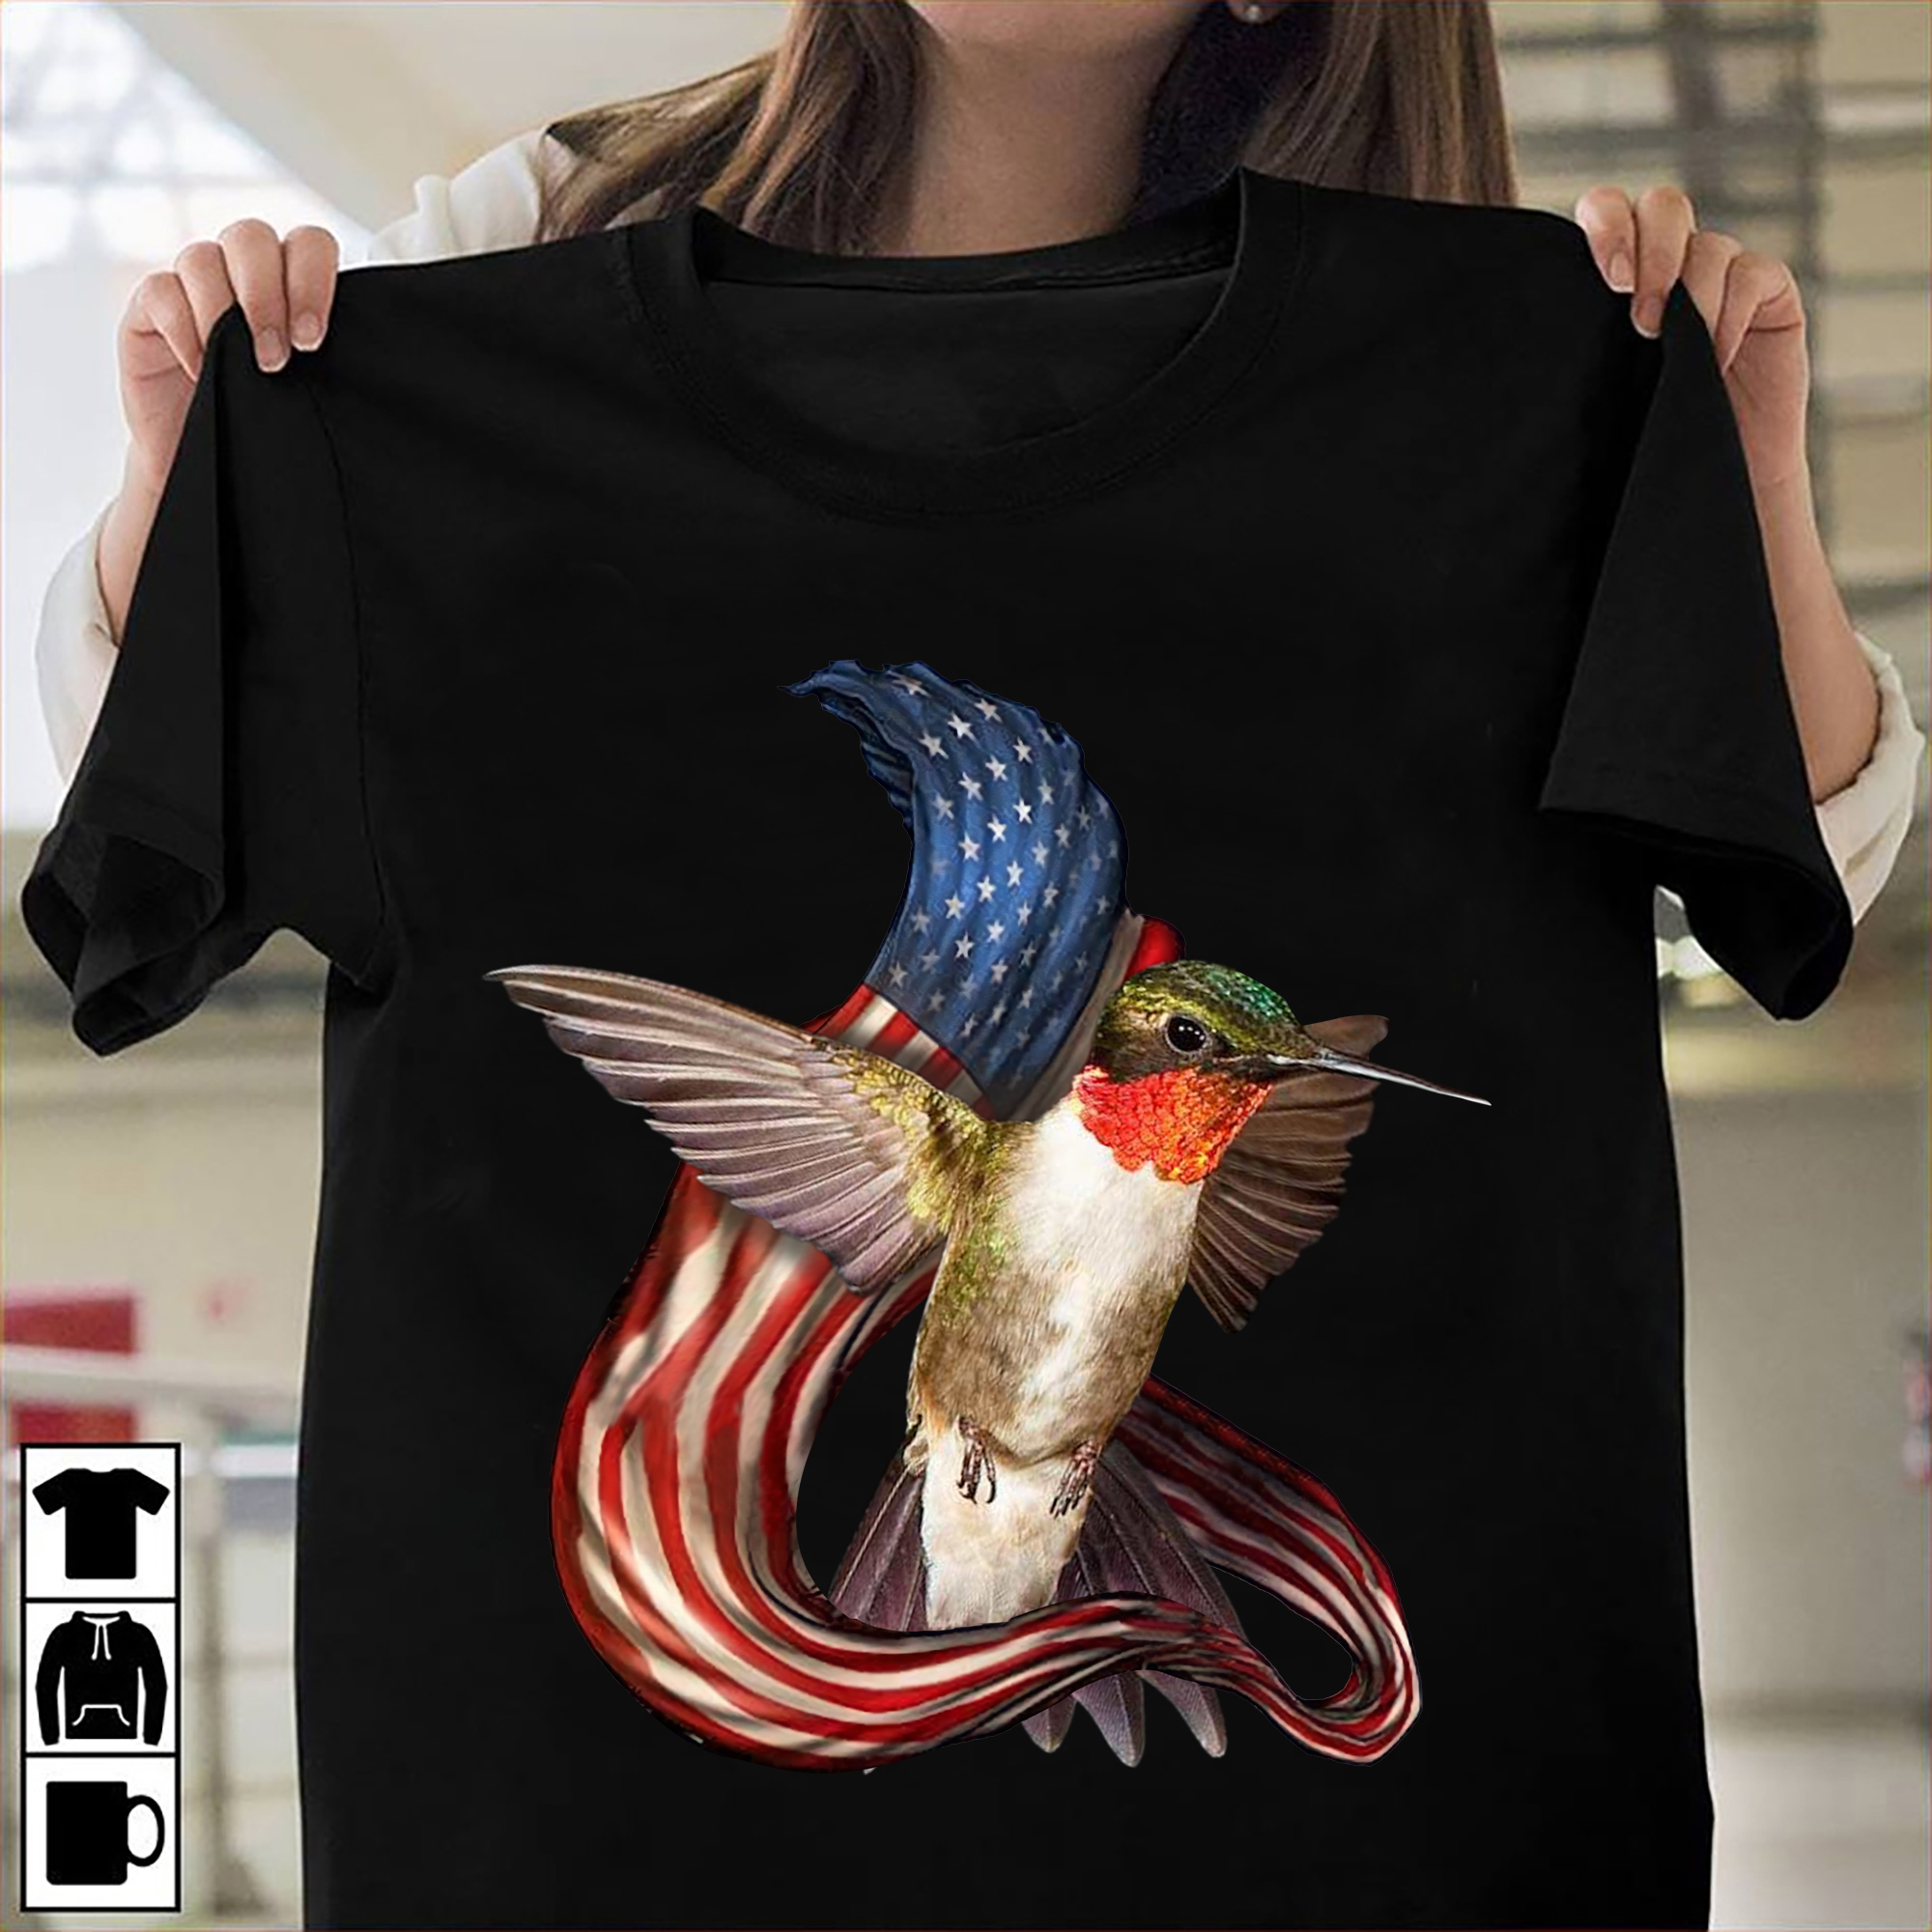 Hummingbird with america flag - The independence day